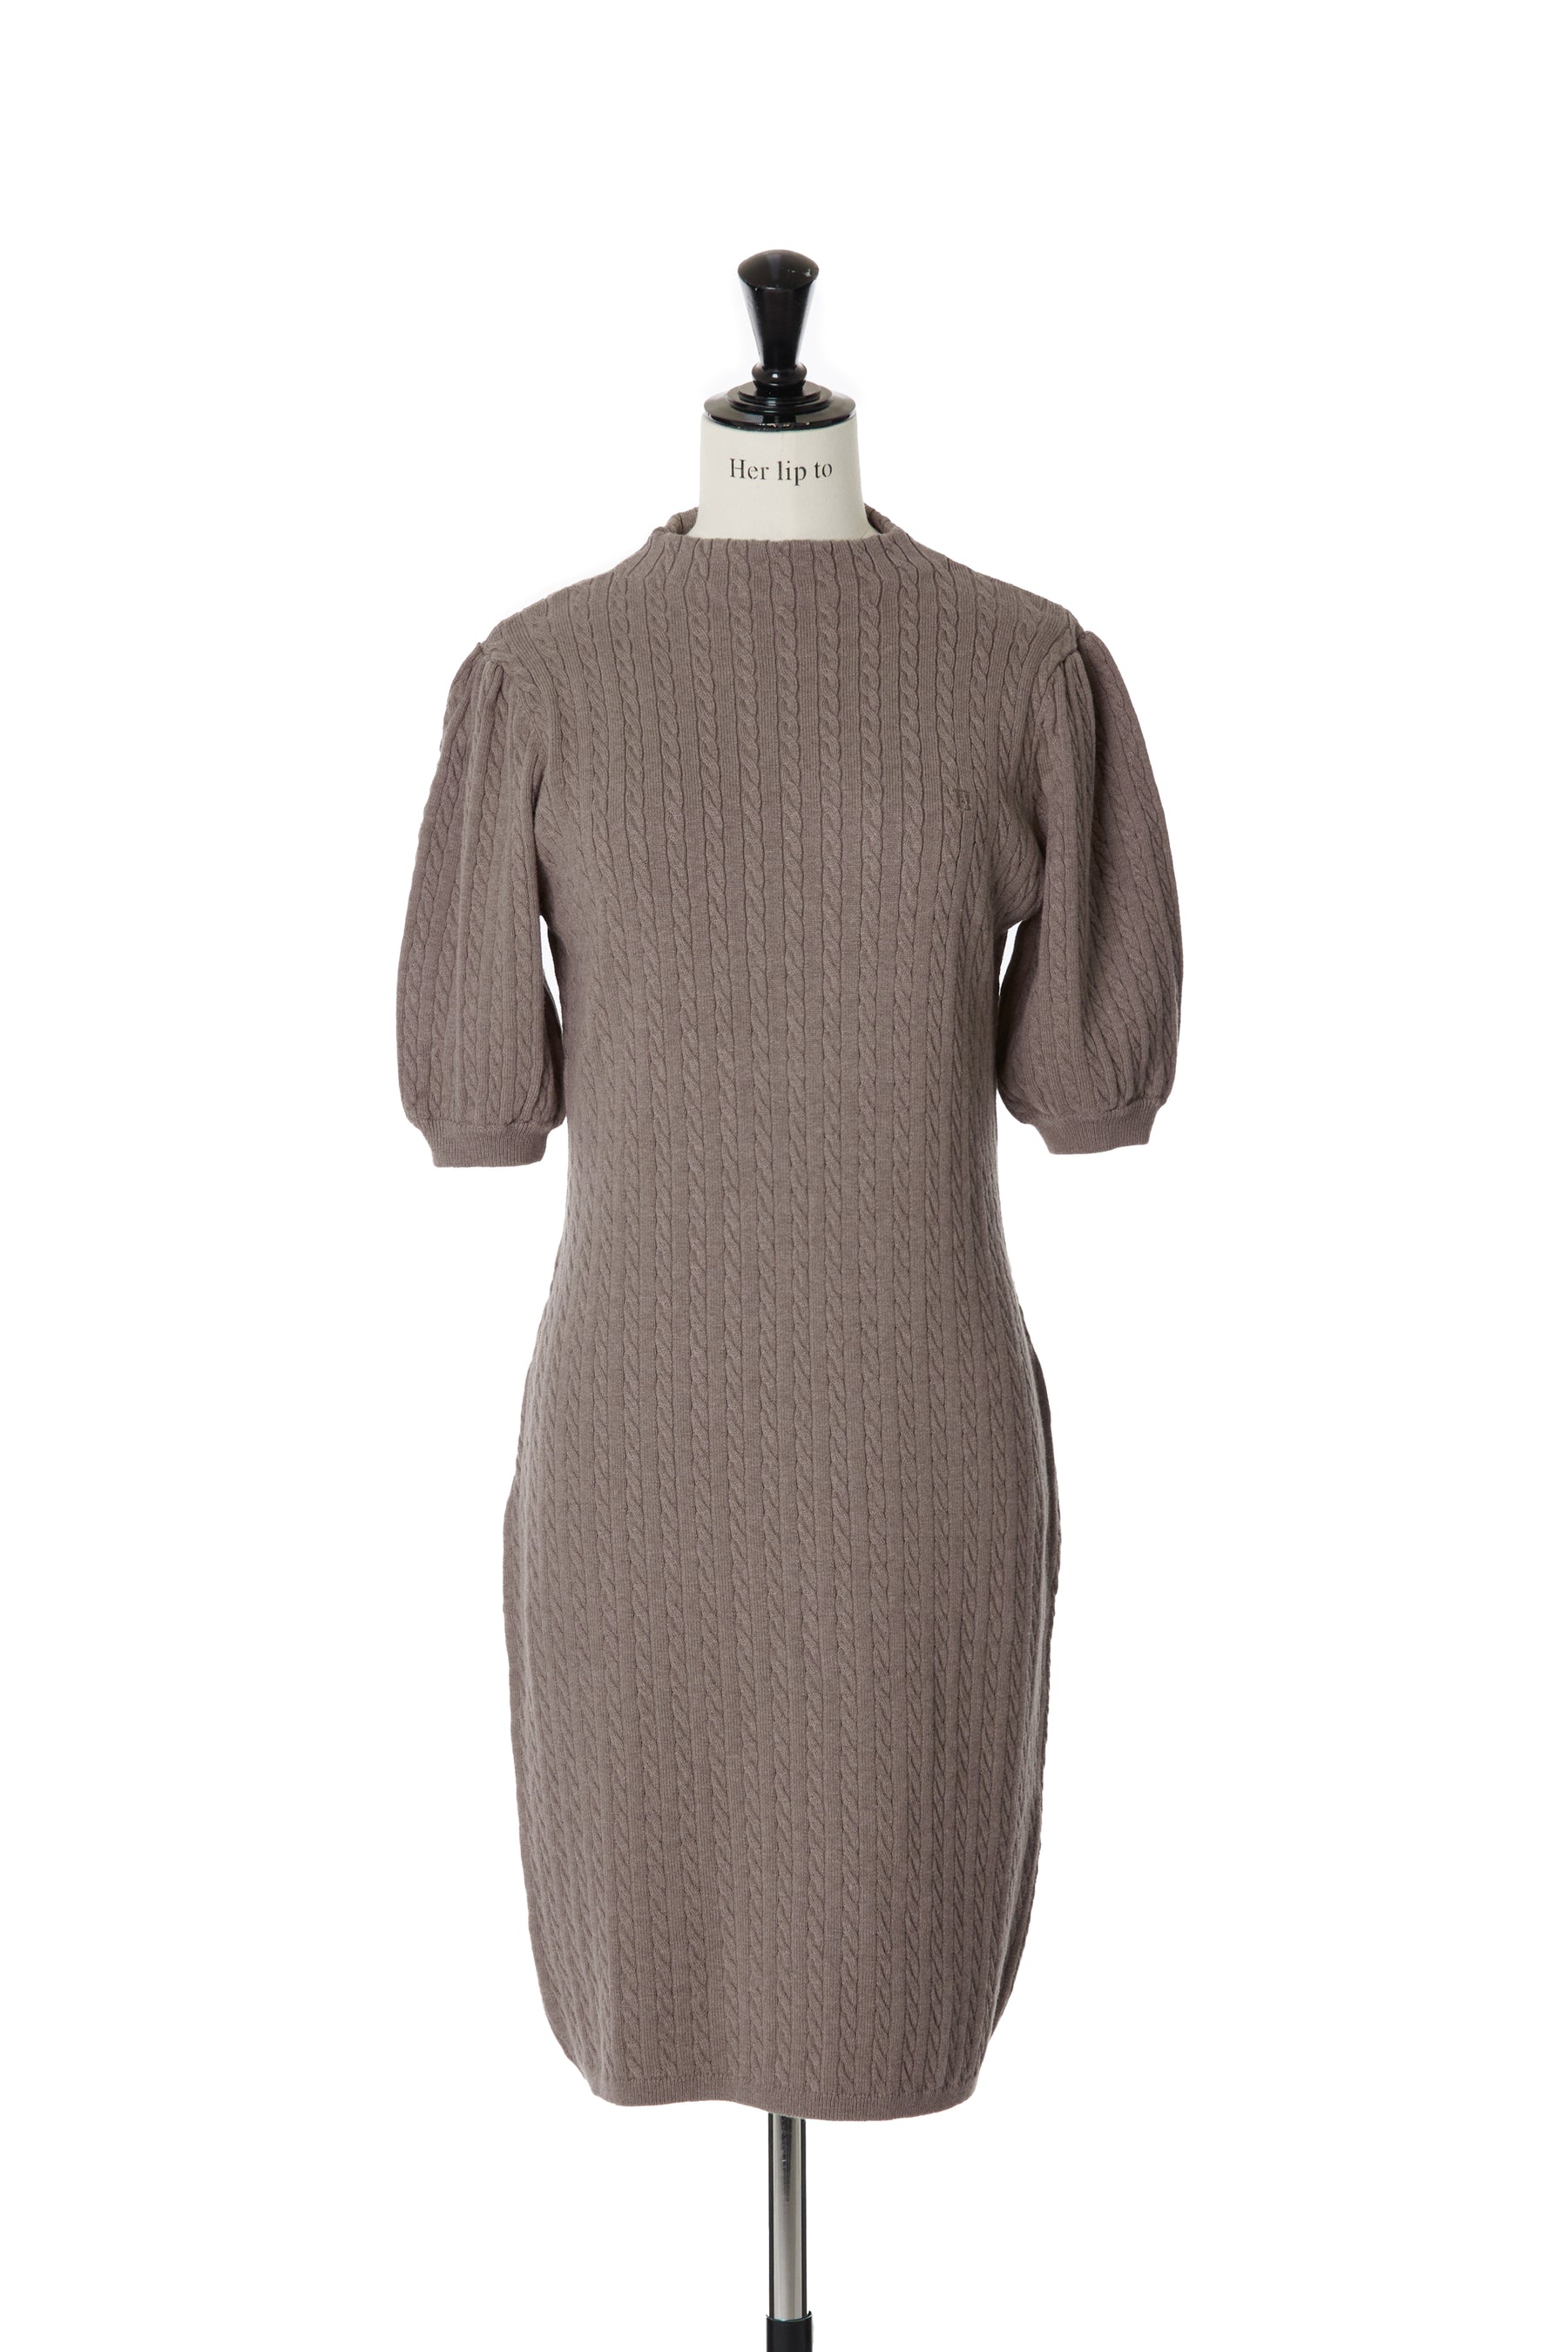 herlipto Puff Sleeve Cable Knit Dress-